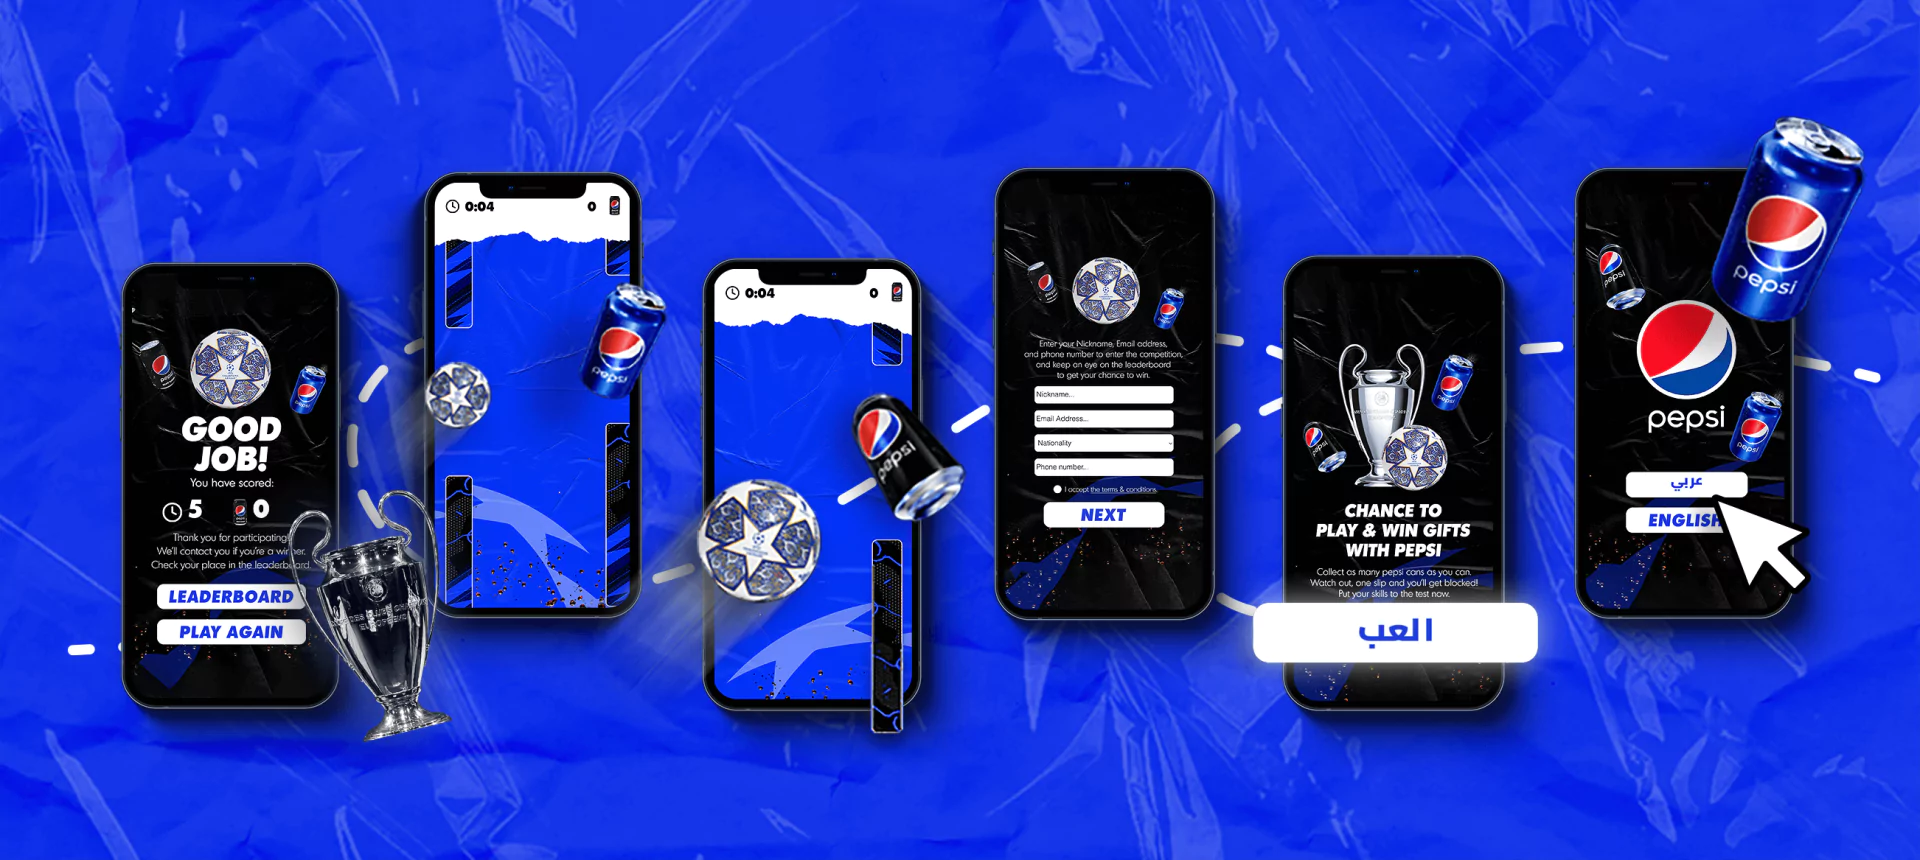 Pepsi’s Gamification Challenge : Win a Trip to UEFA